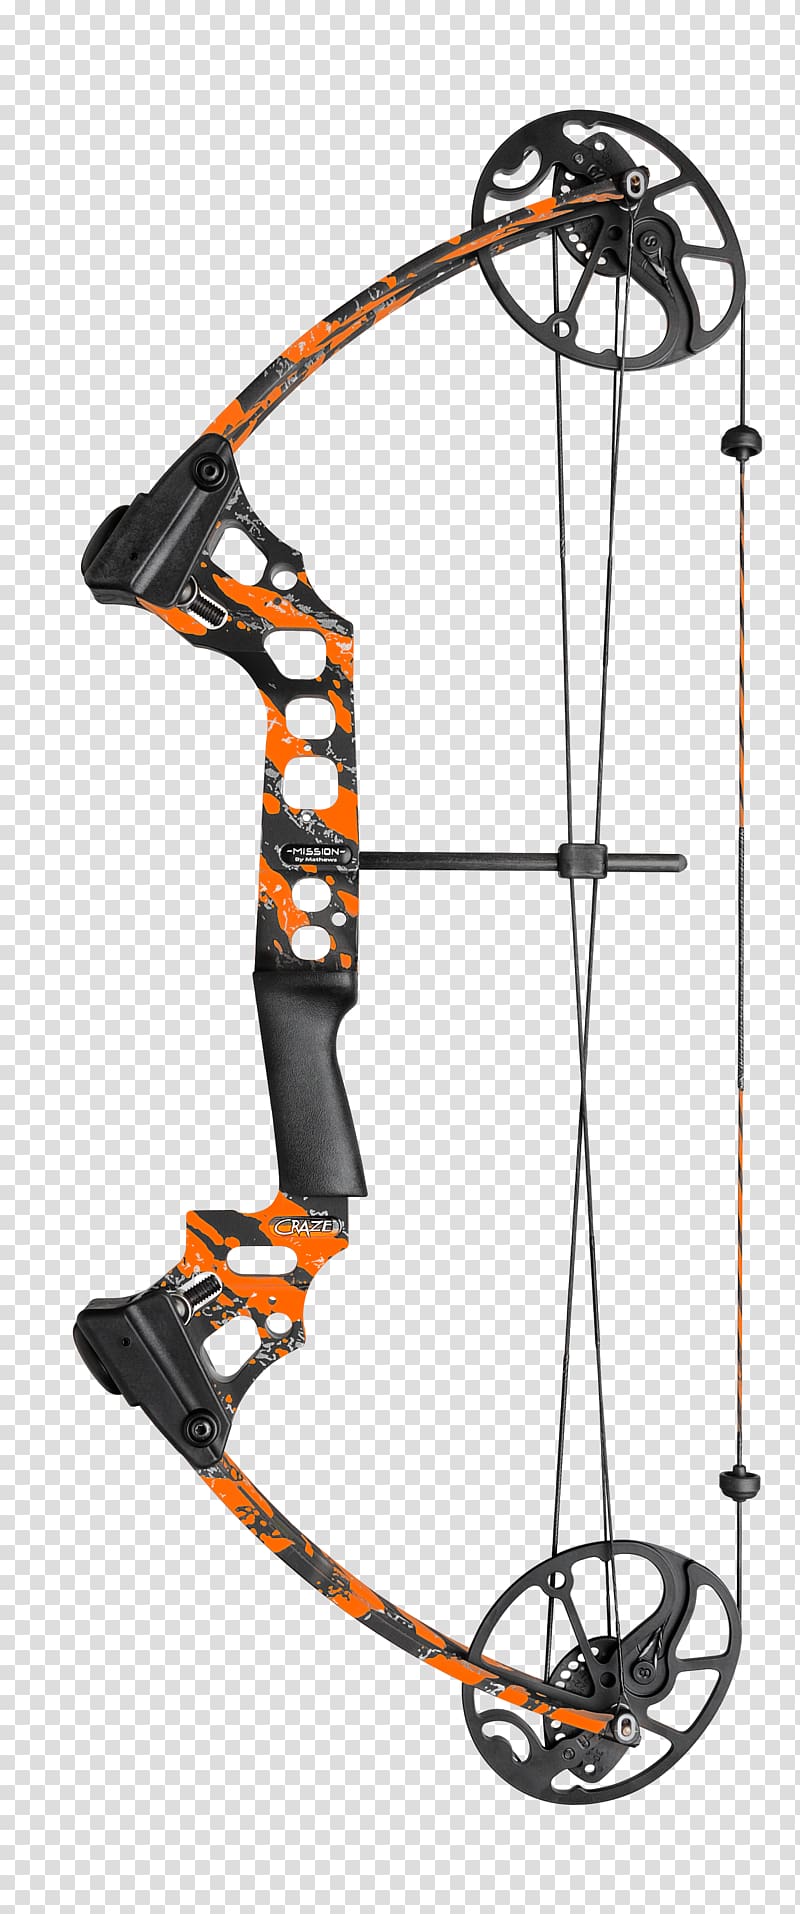 Compound Bows Bow and arrow Archery Bowhunting, archery transparent background PNG clipart